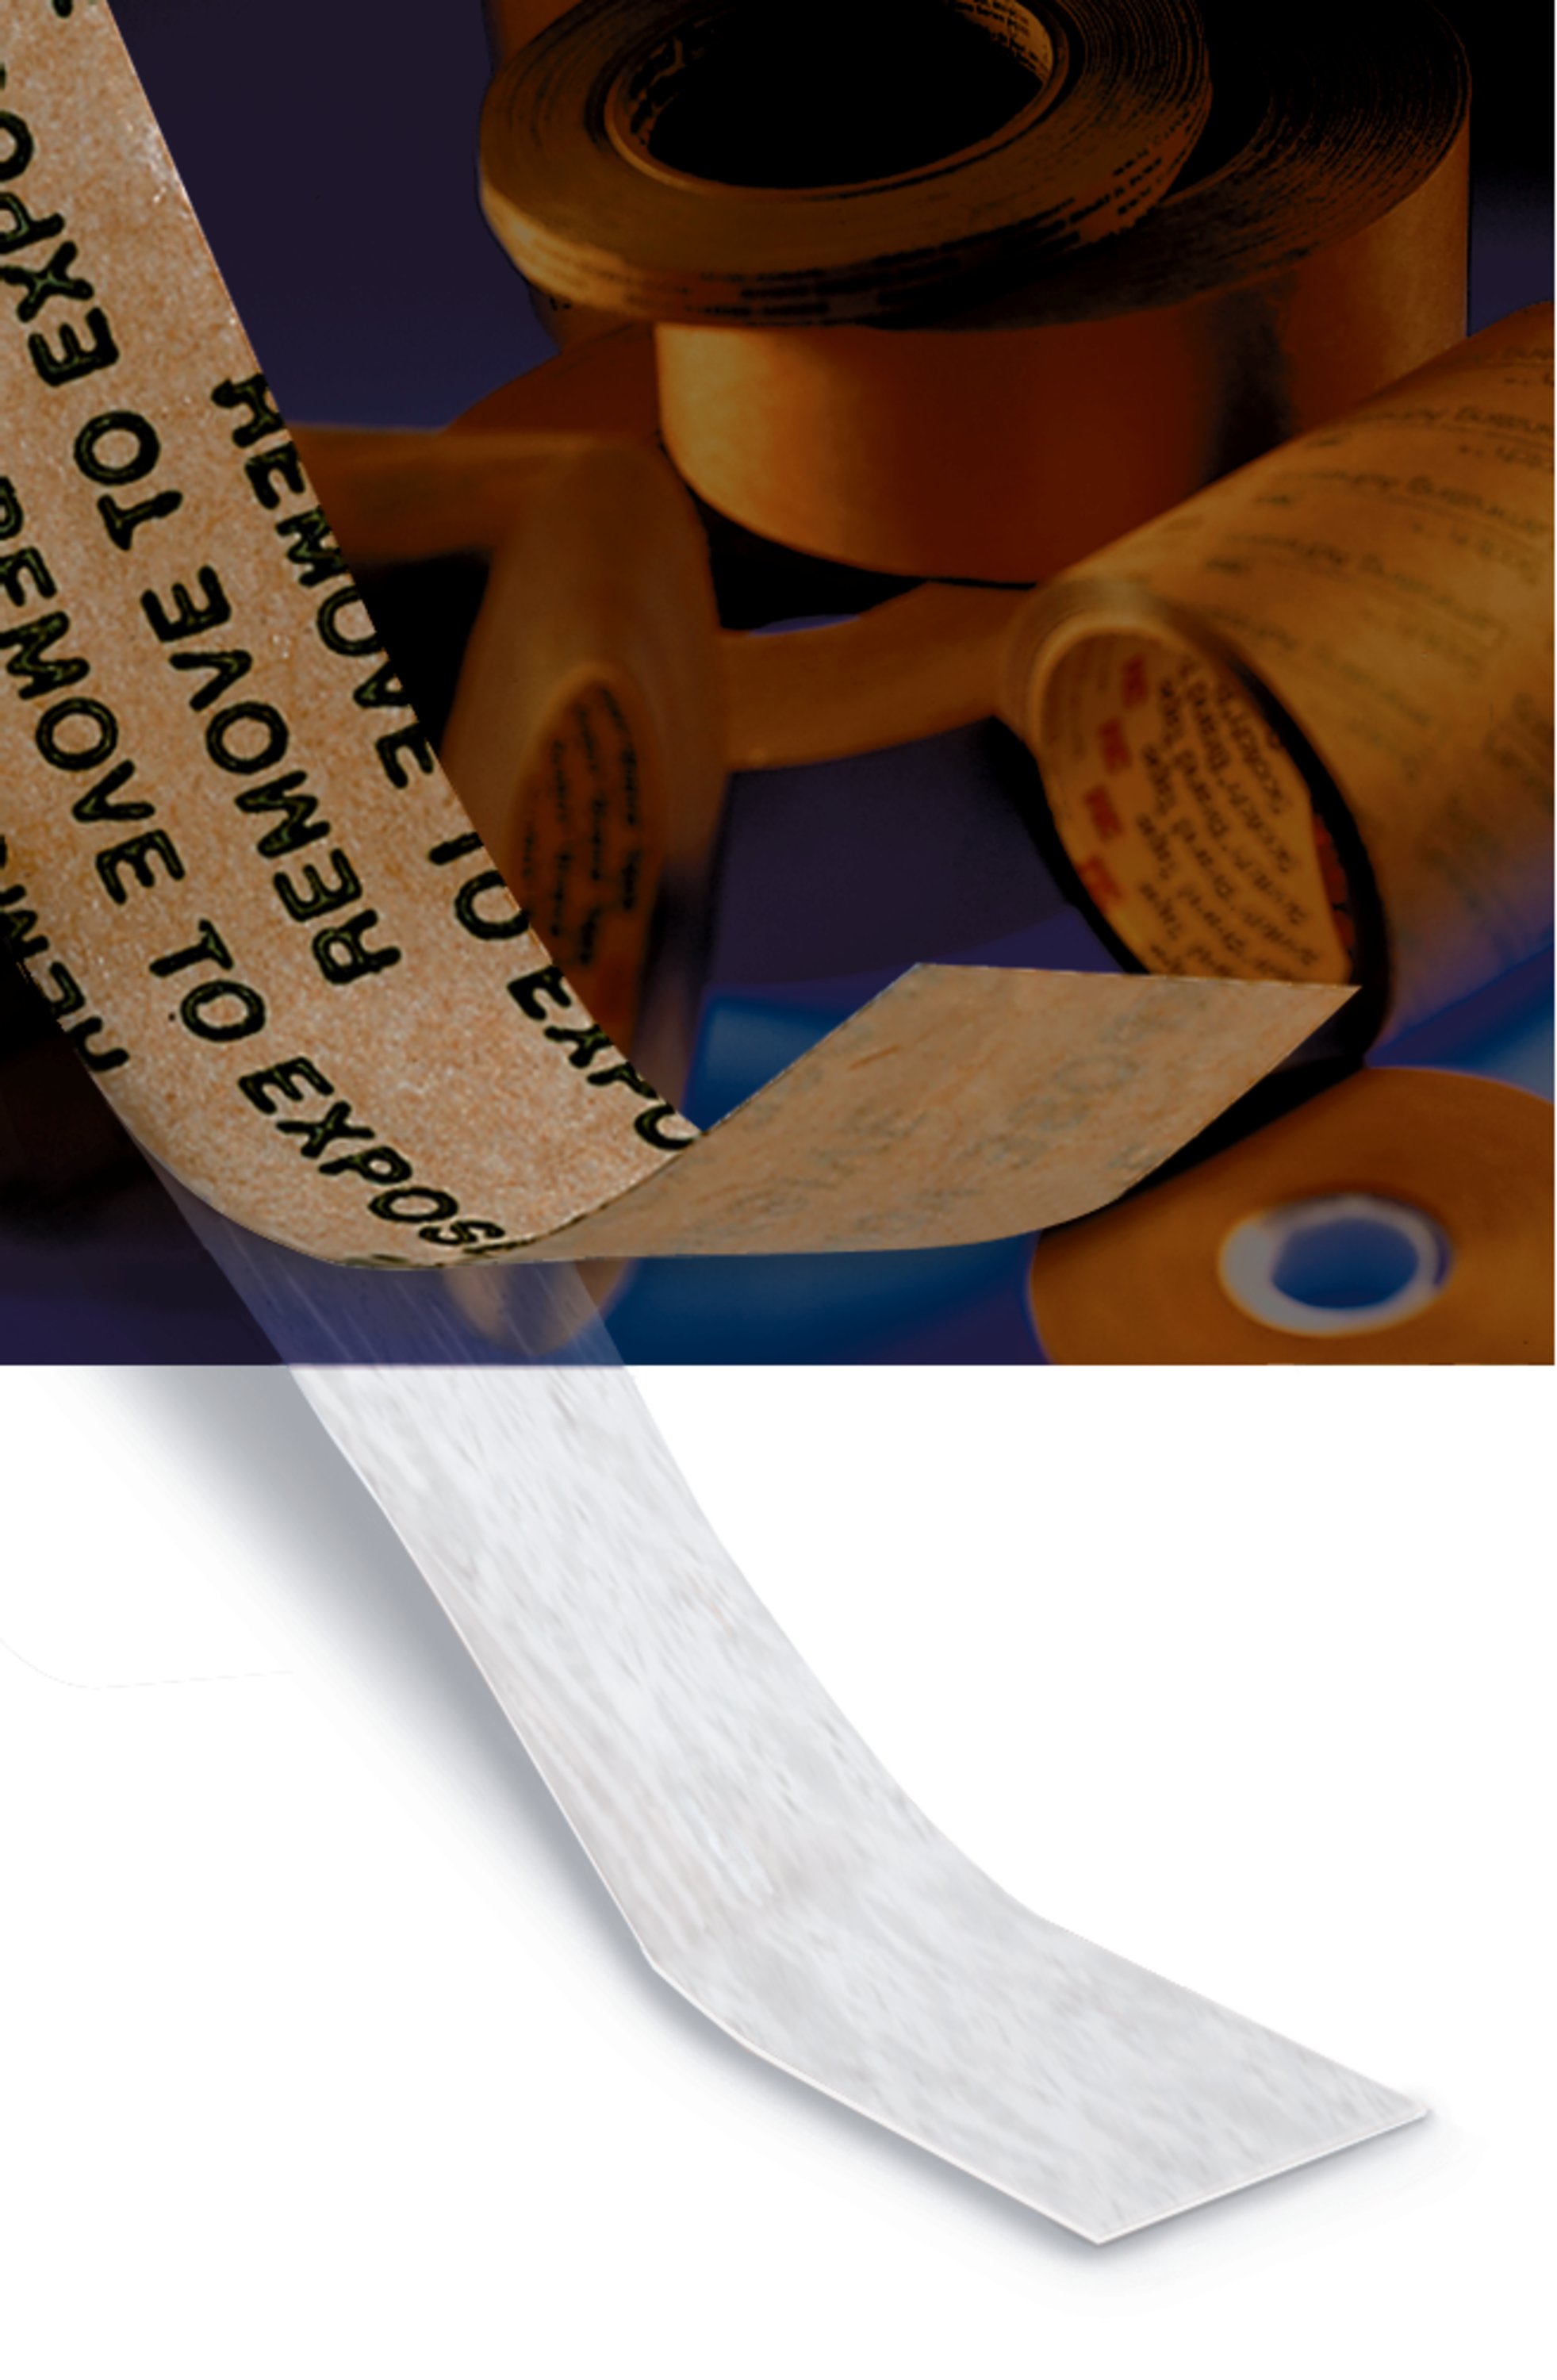 Adhesive transfer tape being pulled away from its brown liner